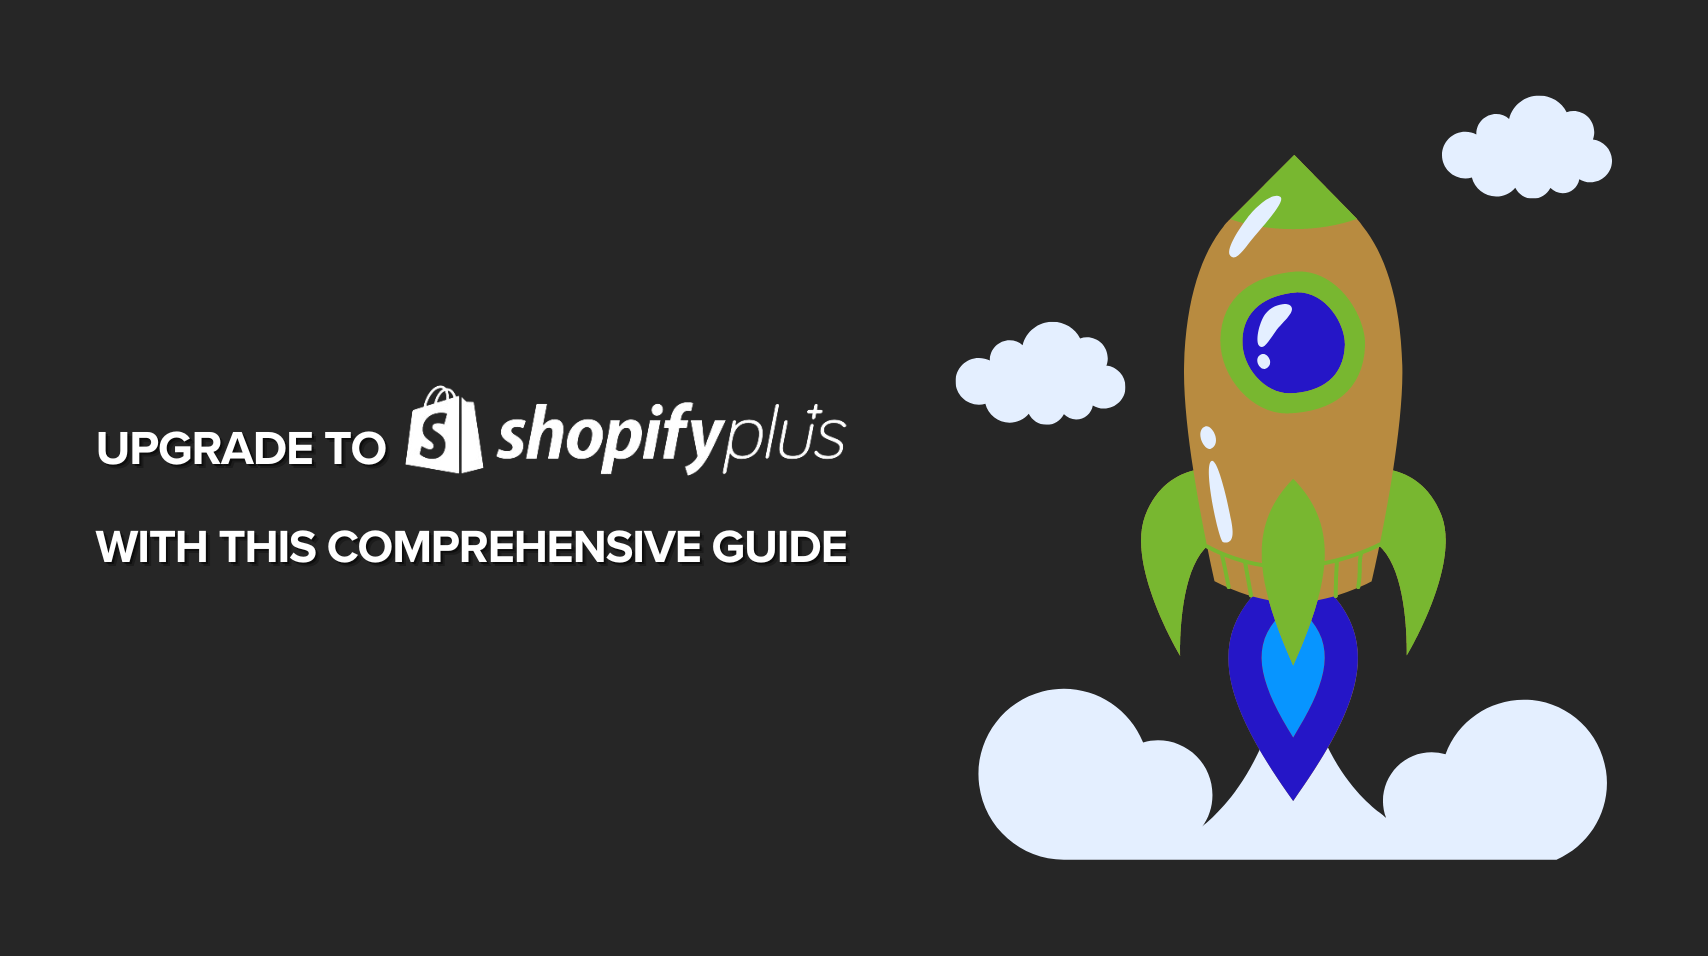 The 6 Crucial Steps To Upgrade to Shopify Plus Effectively